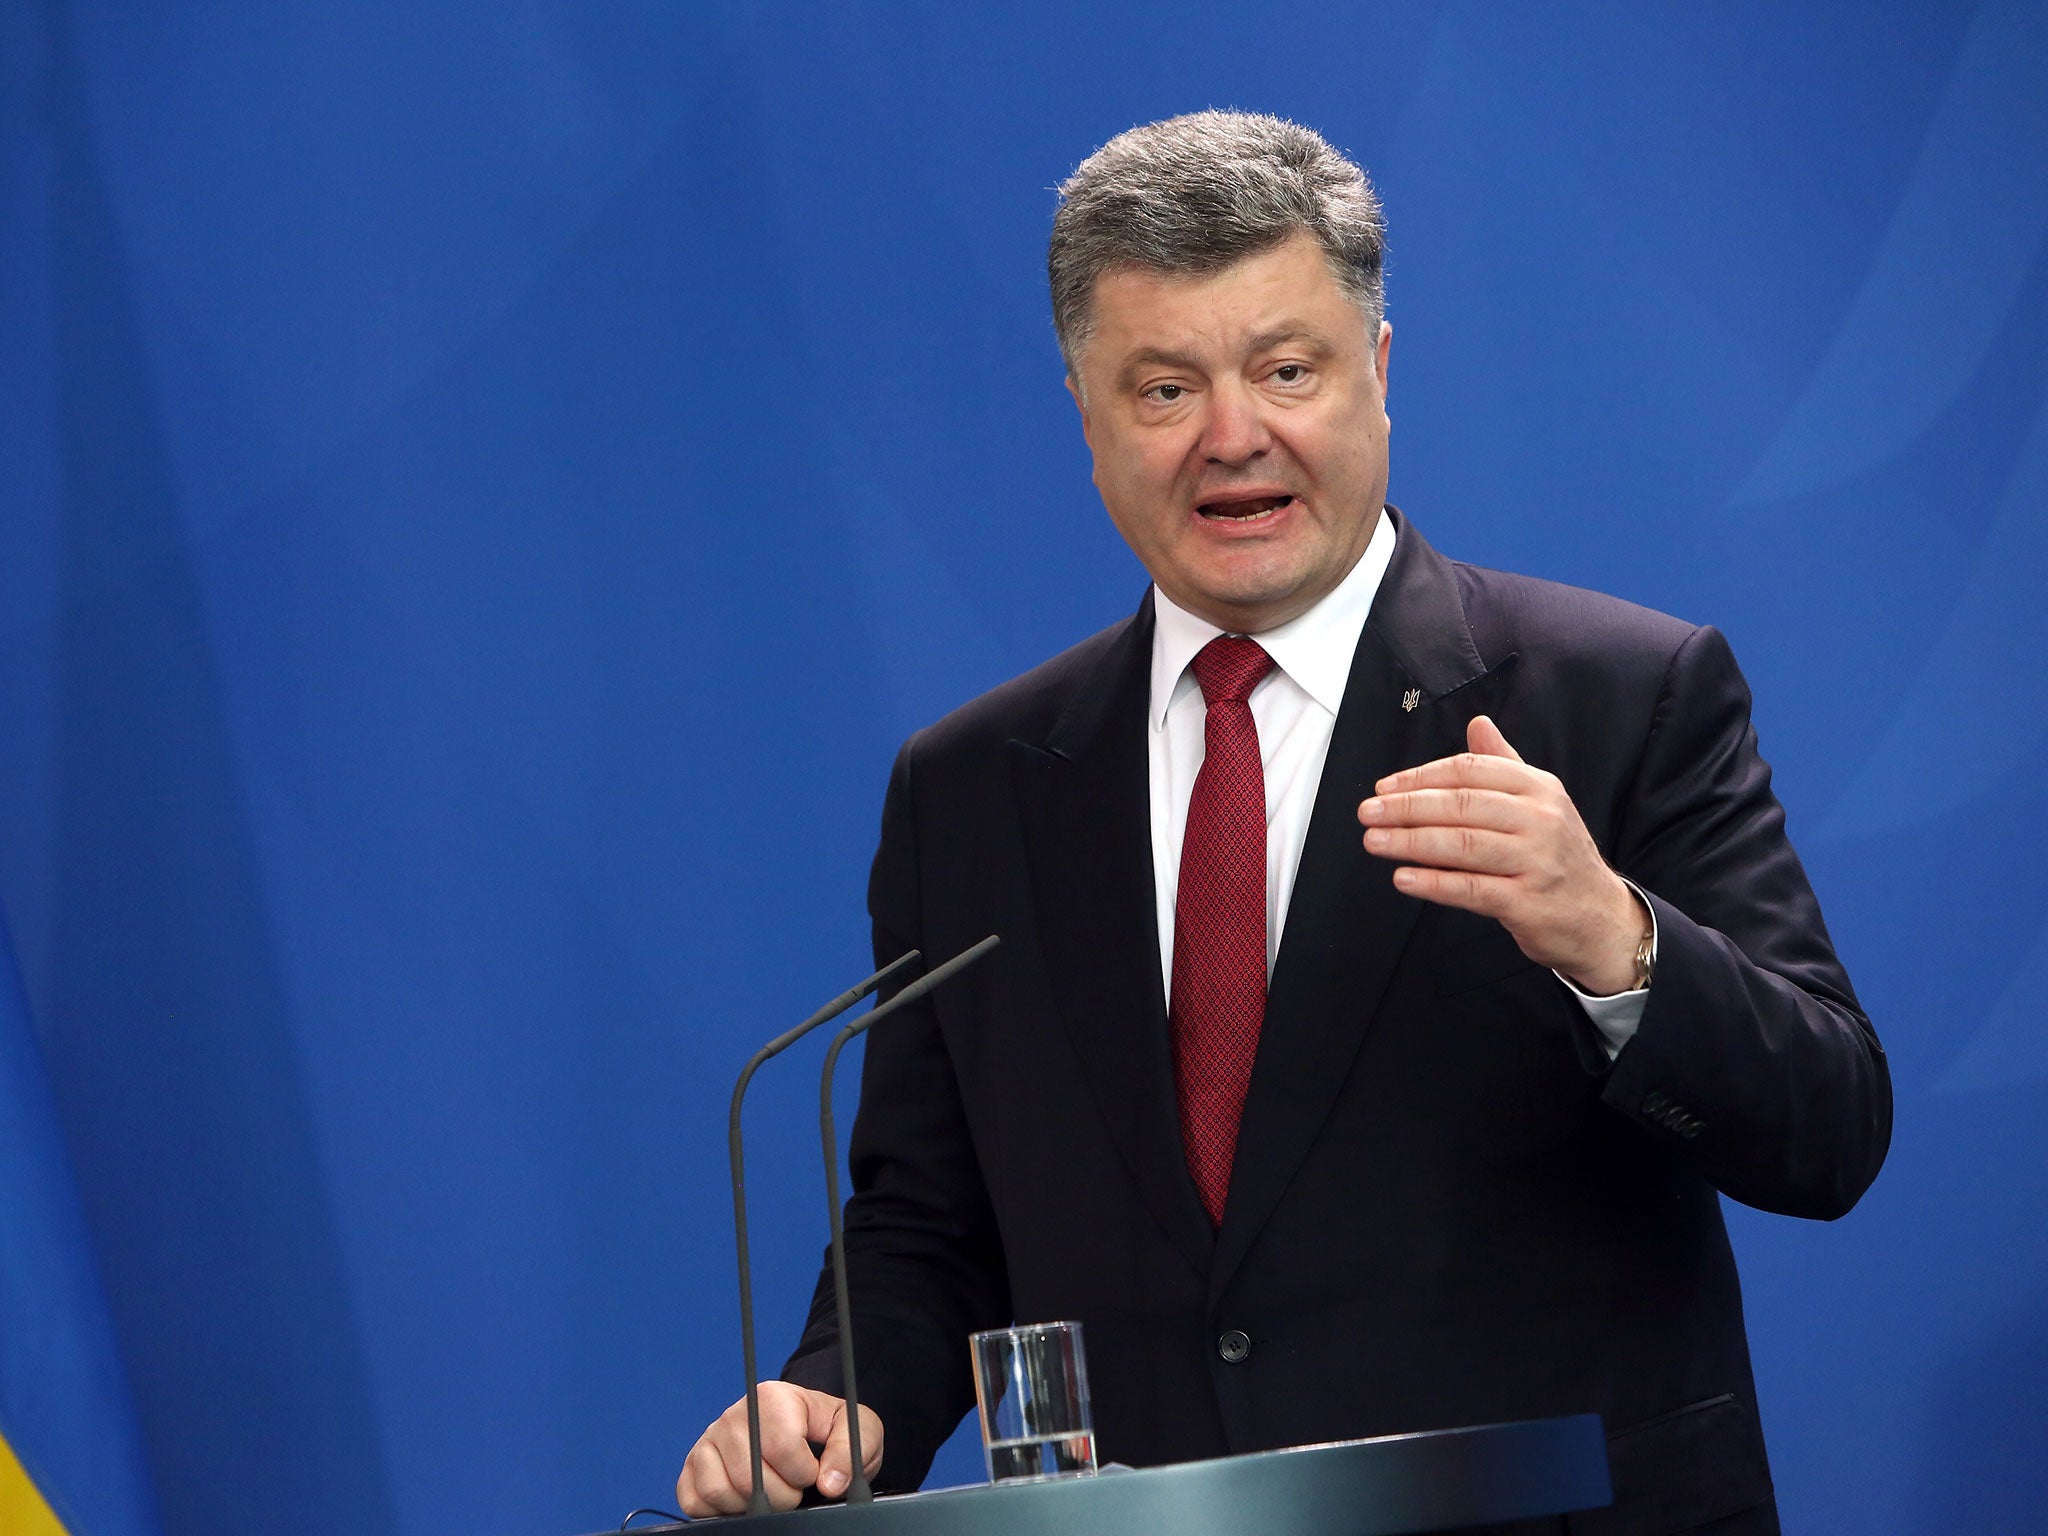 Ukrainian President Petro Poroshenko gives a joint statement to the press with the German chancellor at the chancellery in Berlin on May 13, 2015.